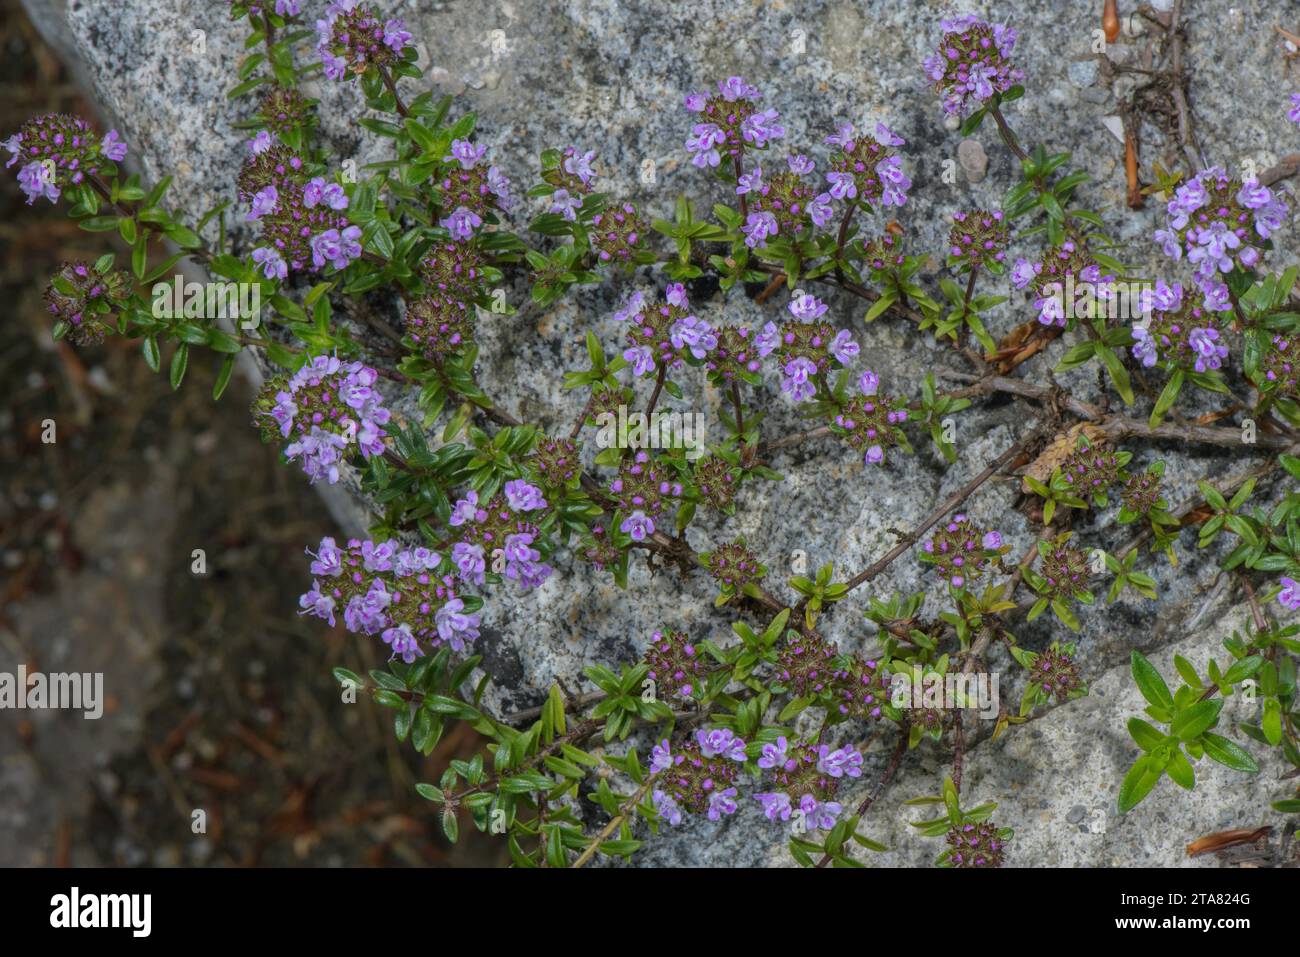 A Wild Thyme, Thymus longicaulis ssp. odoratus in flower, from south-east Europe. Stock Photo